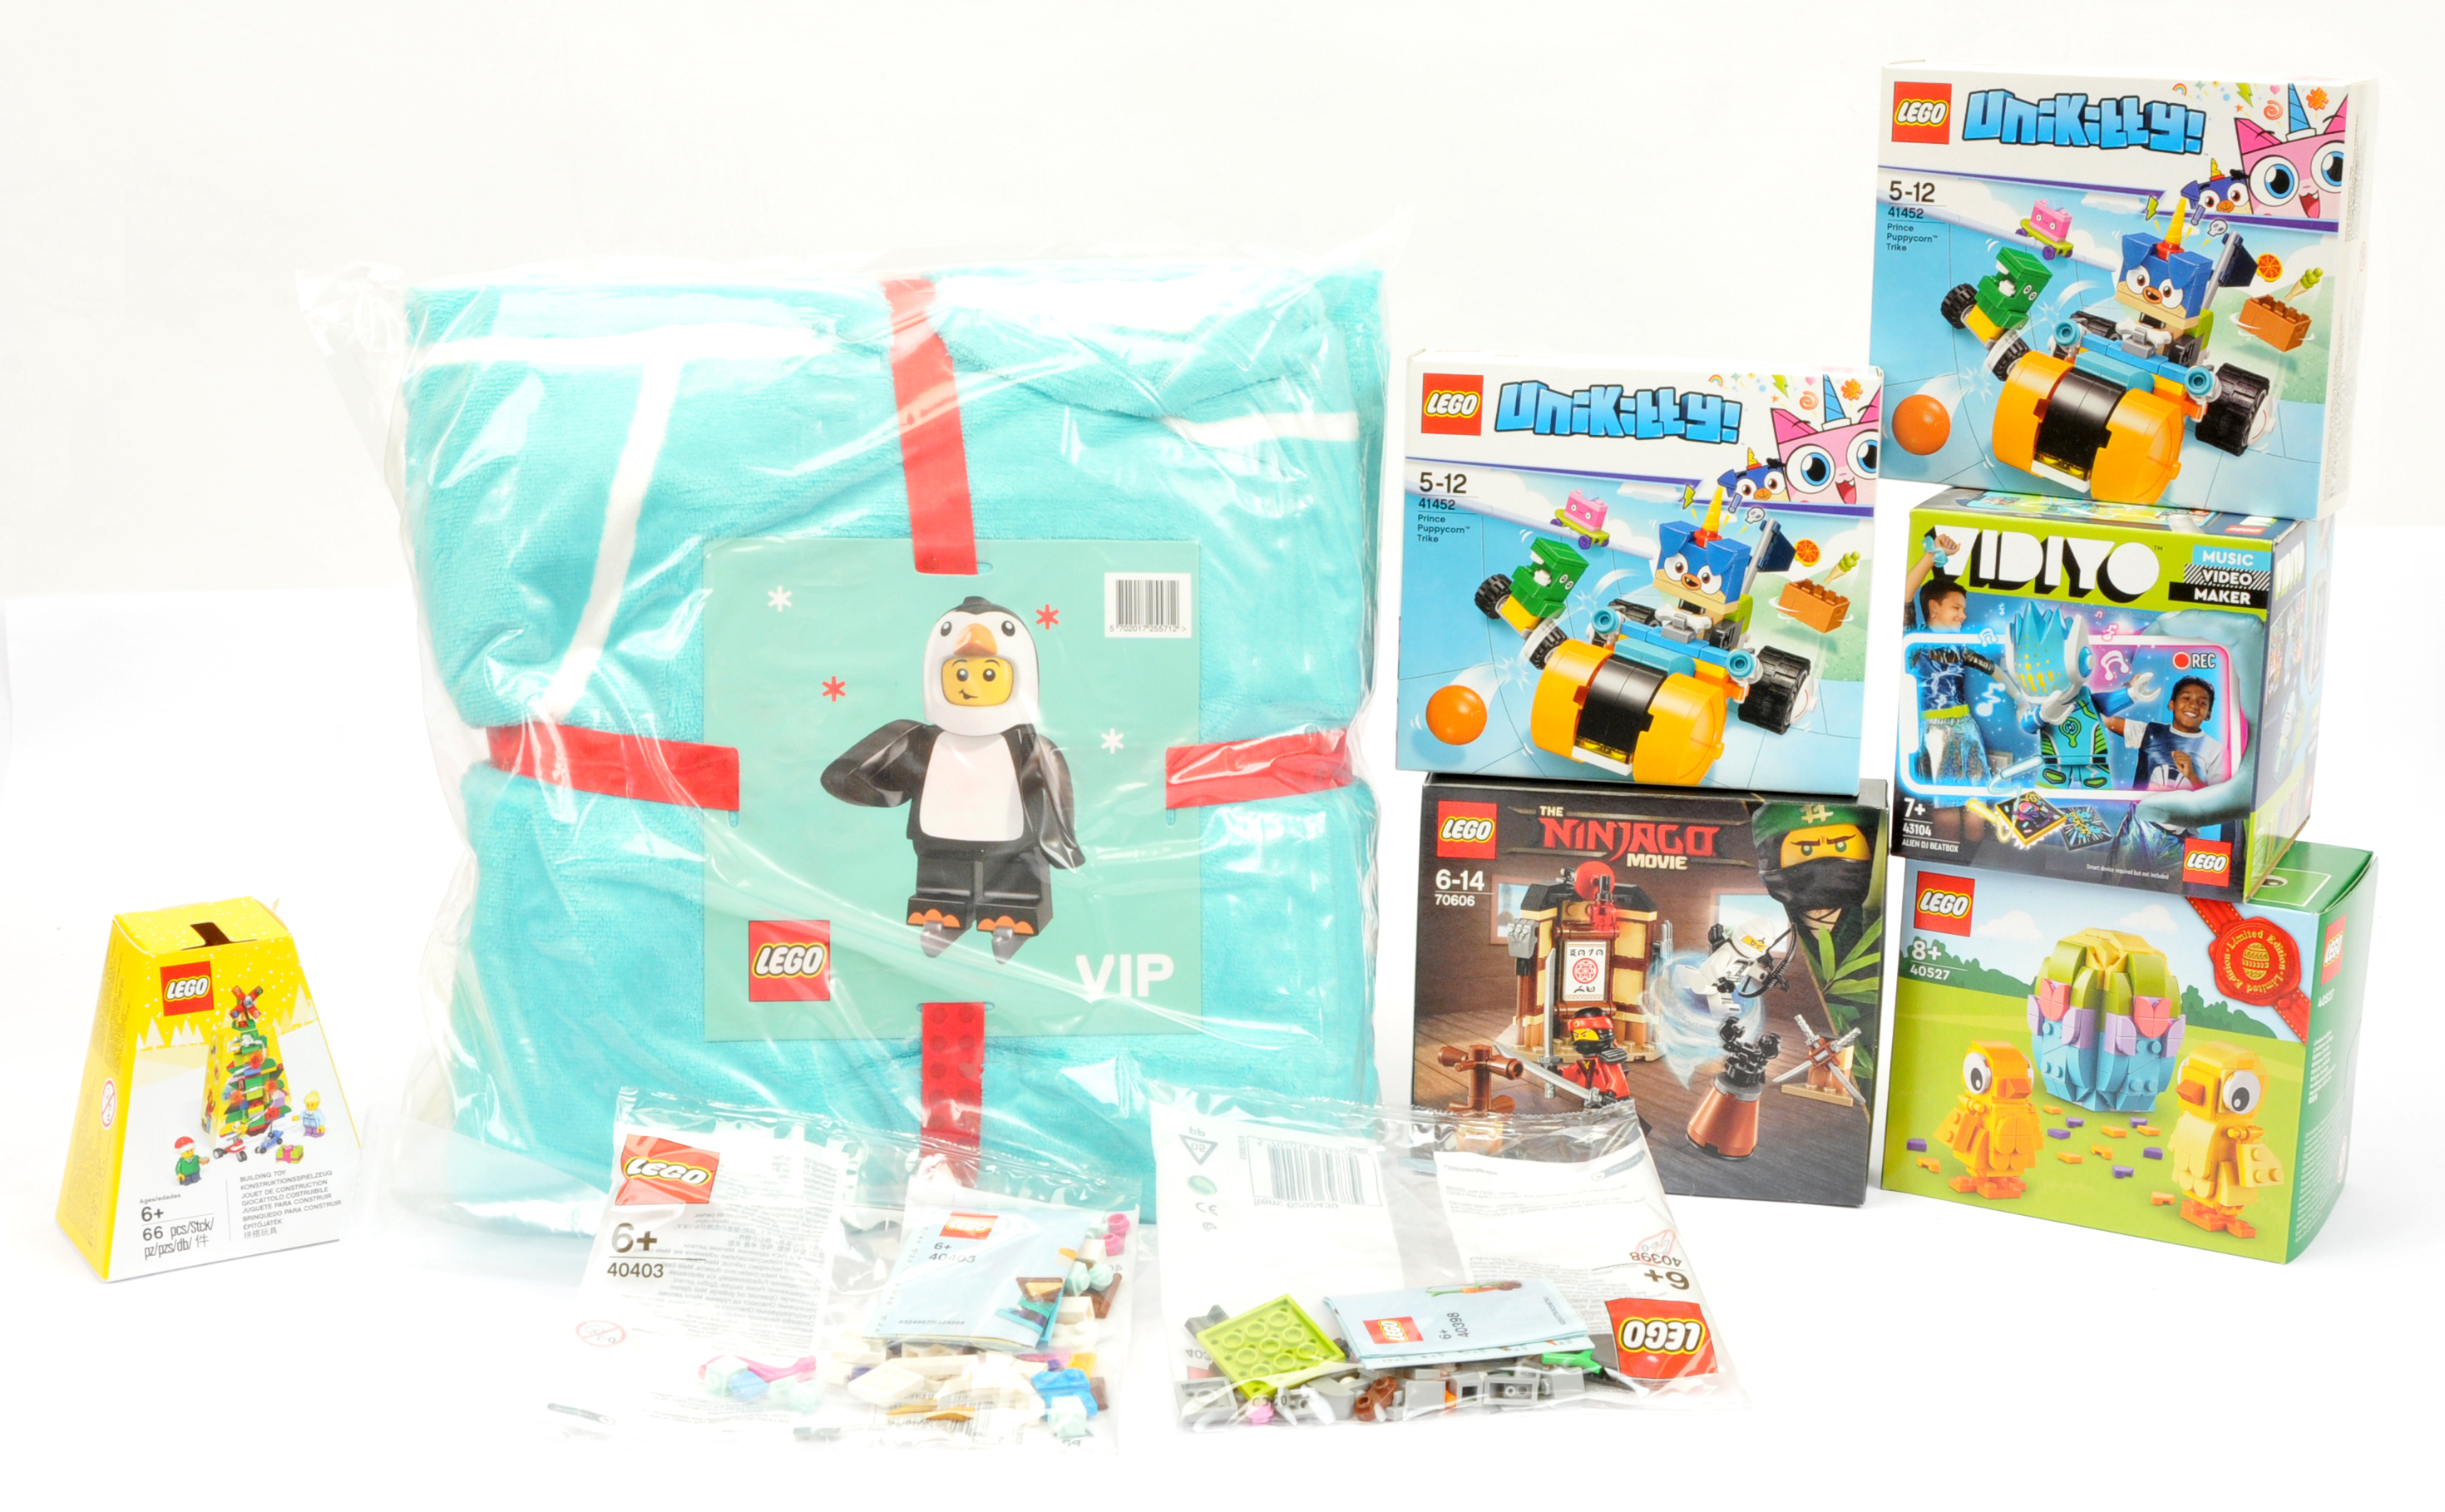 Lego mixed sets includes VIP Fleece Blanket, 40527 Easter Chicks, 41452 x 2 Unikitty - Prince Pup...